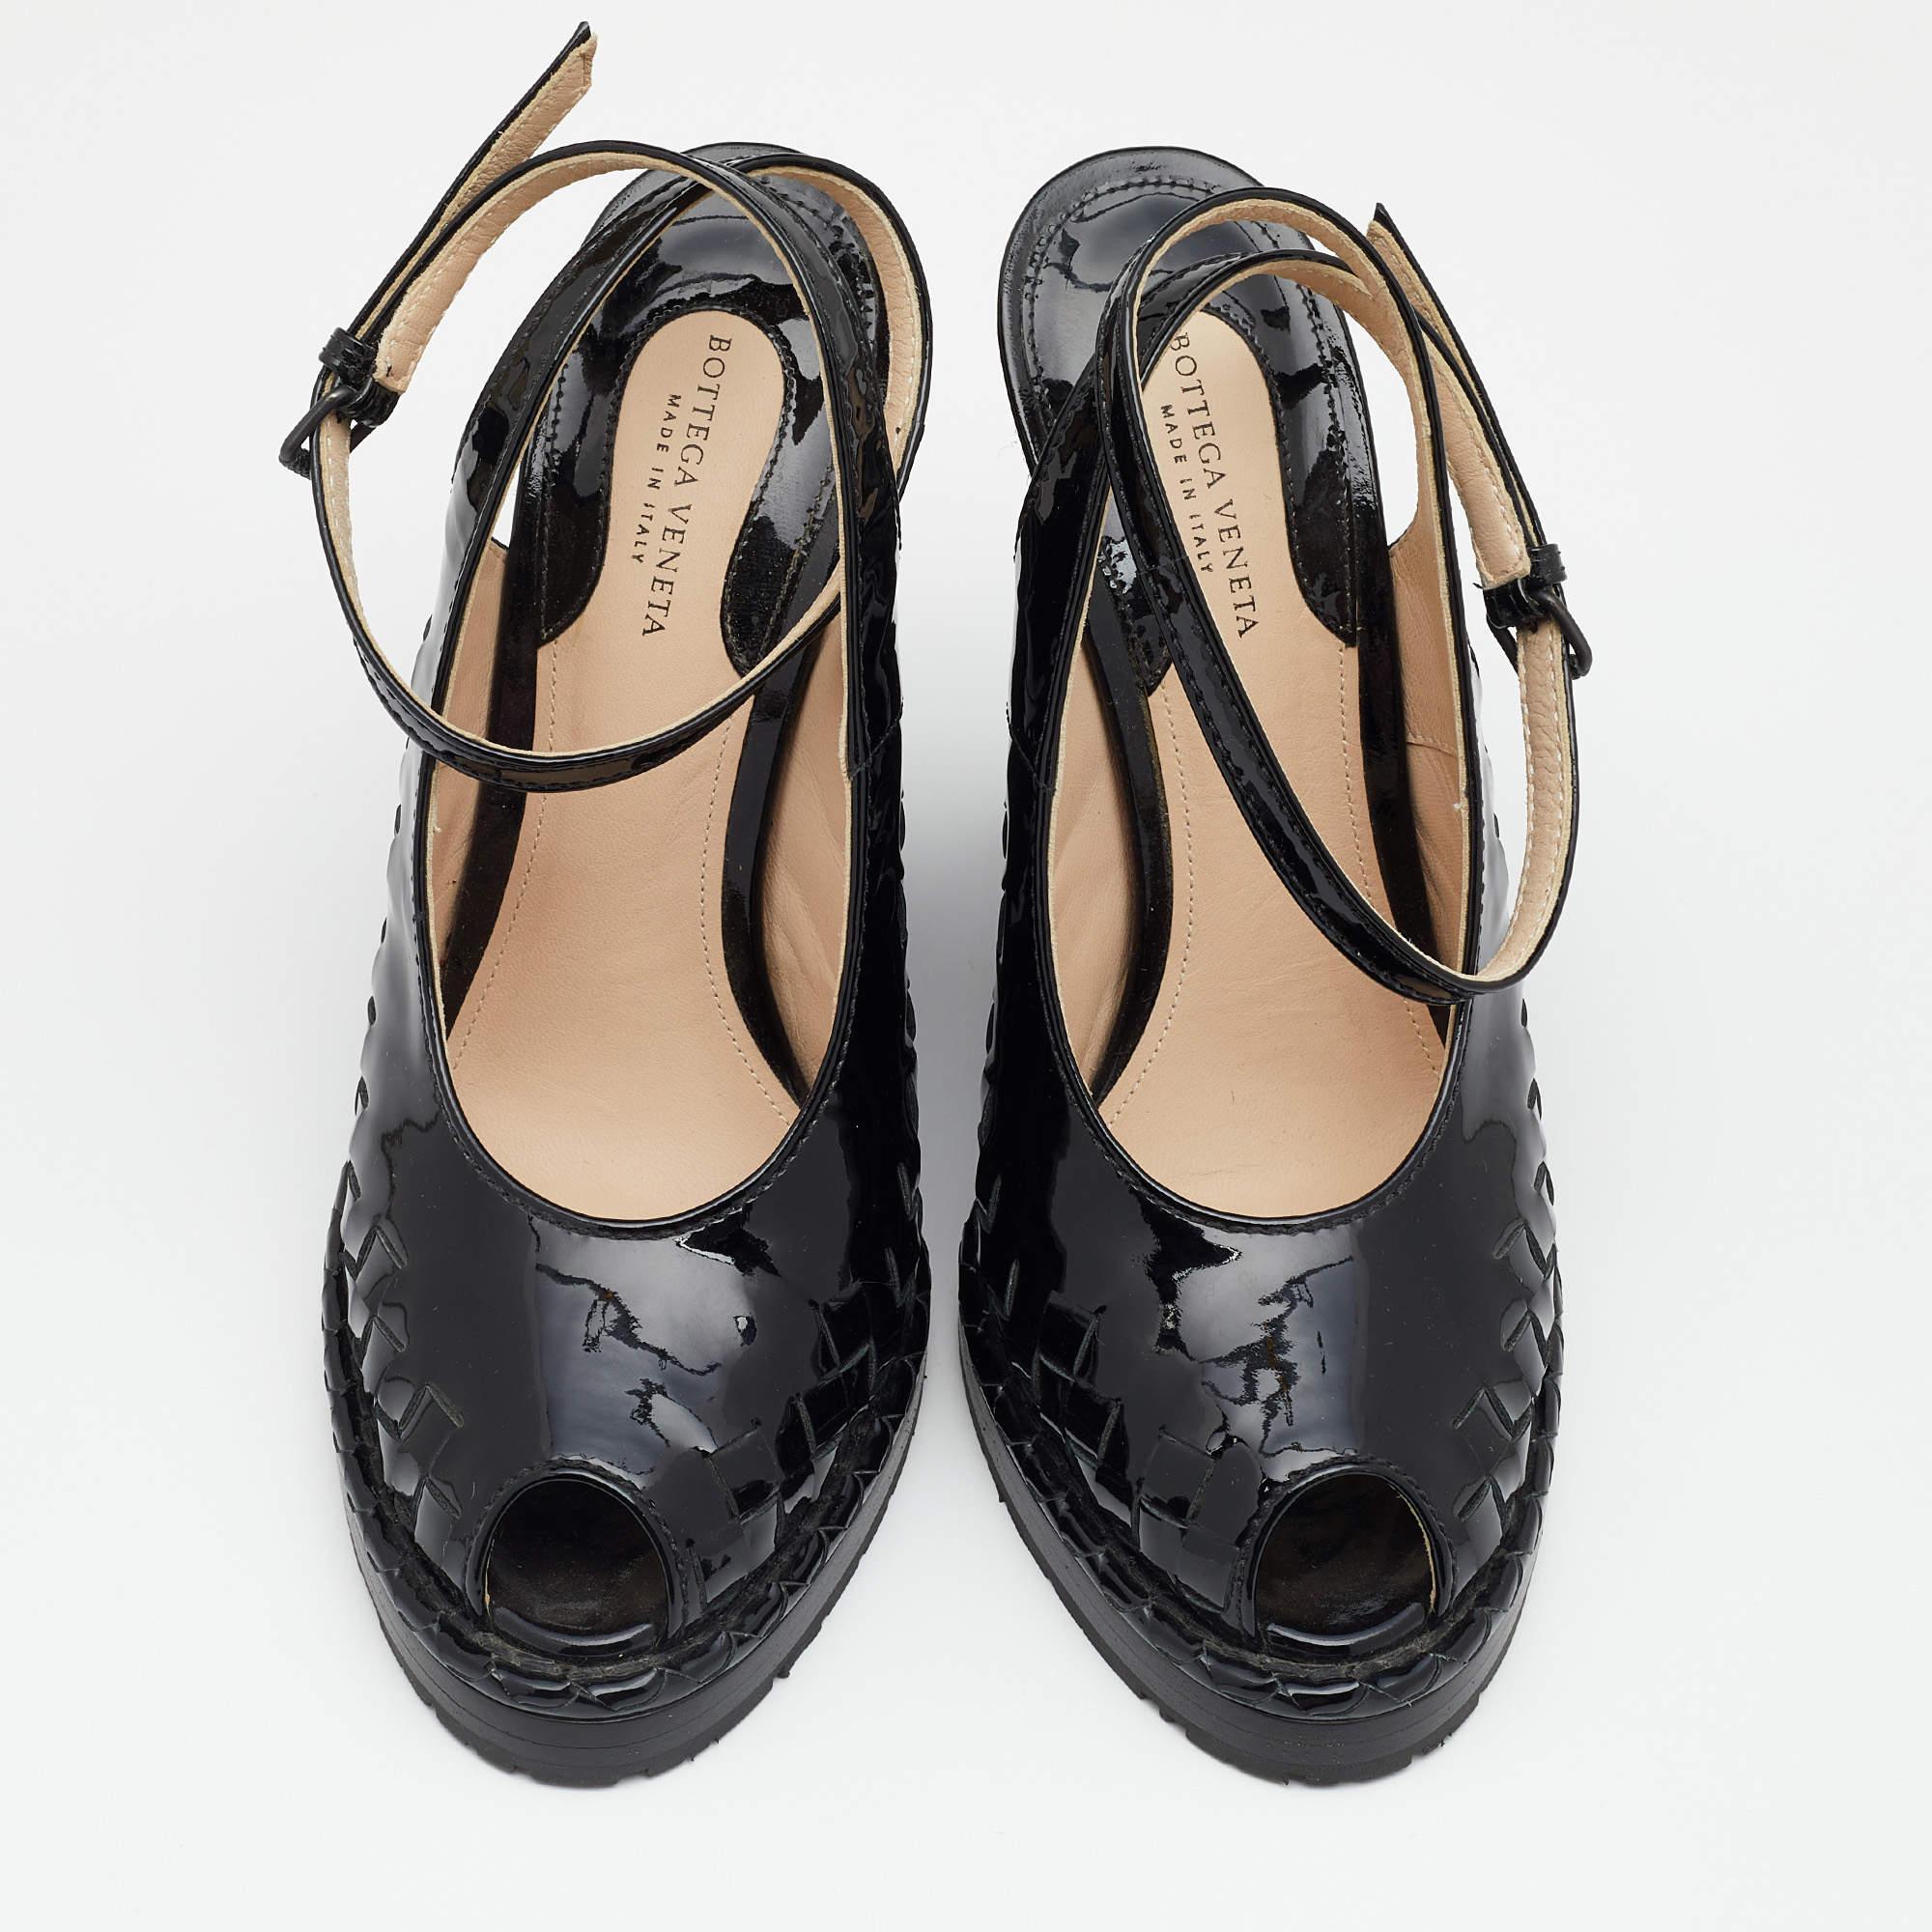 Bottega Veneta has always been known for its excellence in crafting. Designed using the Intrecciato technique, the patent leather wedge sandals come with a glossy finish. Featuring soft, tonal braided jute heels, the sole ensures ease. Fastened with